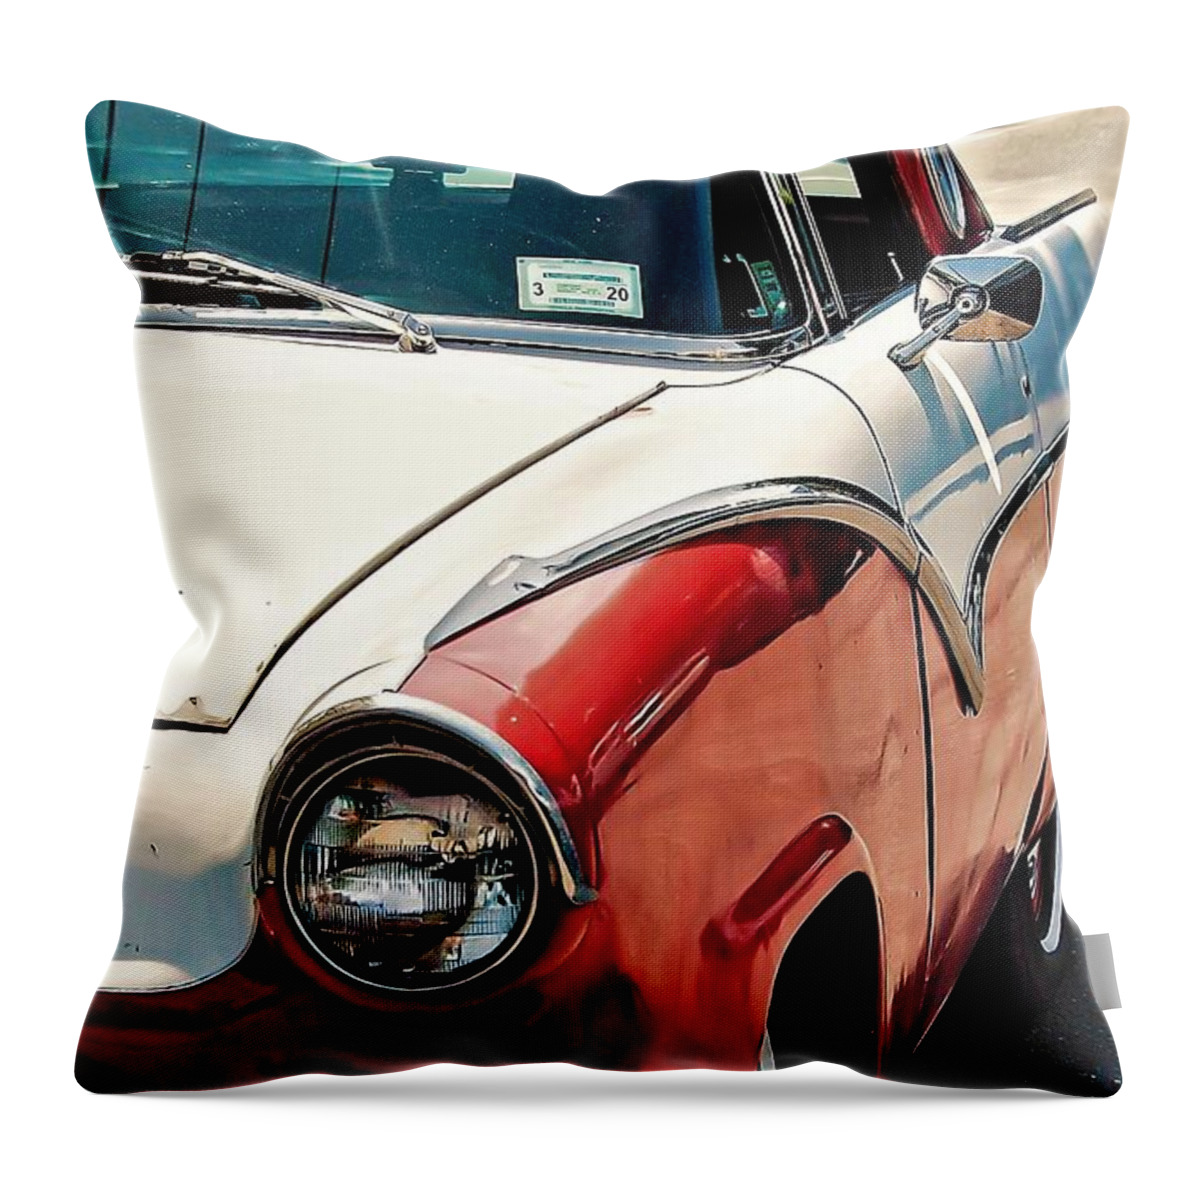 Old Car Red Metal Throw Pillow featuring the photograph Old Car by John Linnemeyer